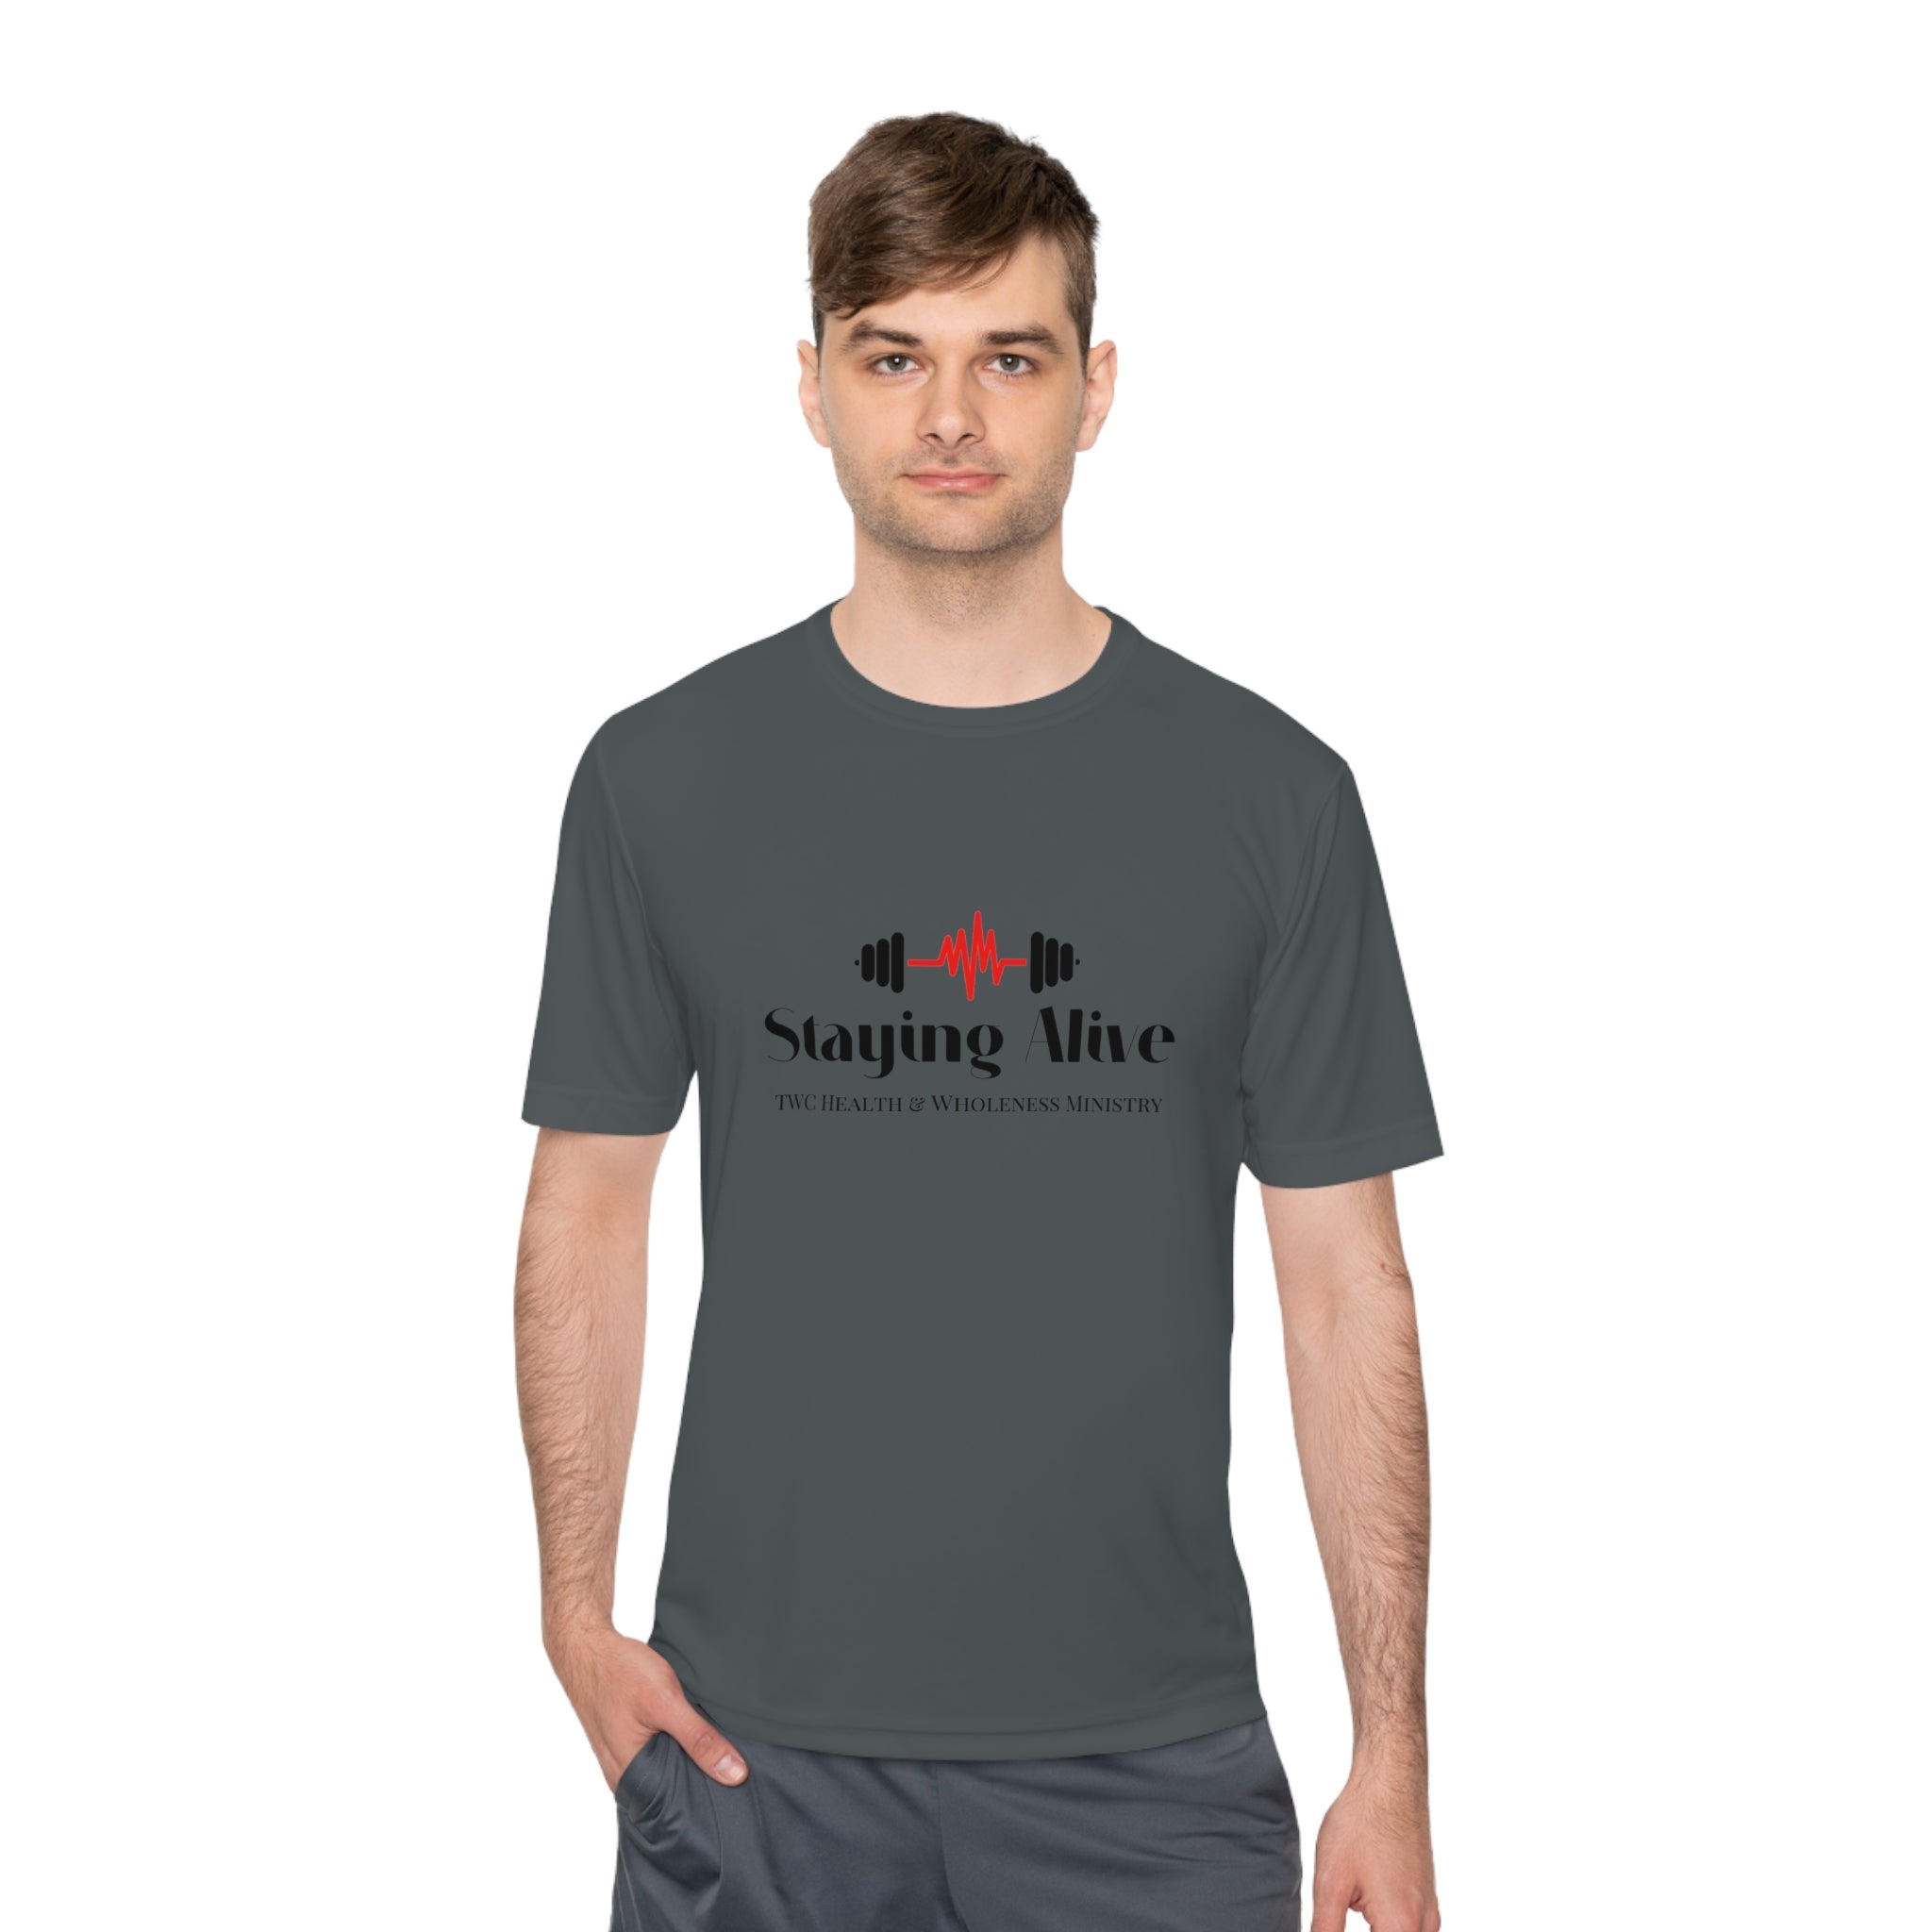 TWC Staying Alive Ministry Unisex Moisture Wicking Tee